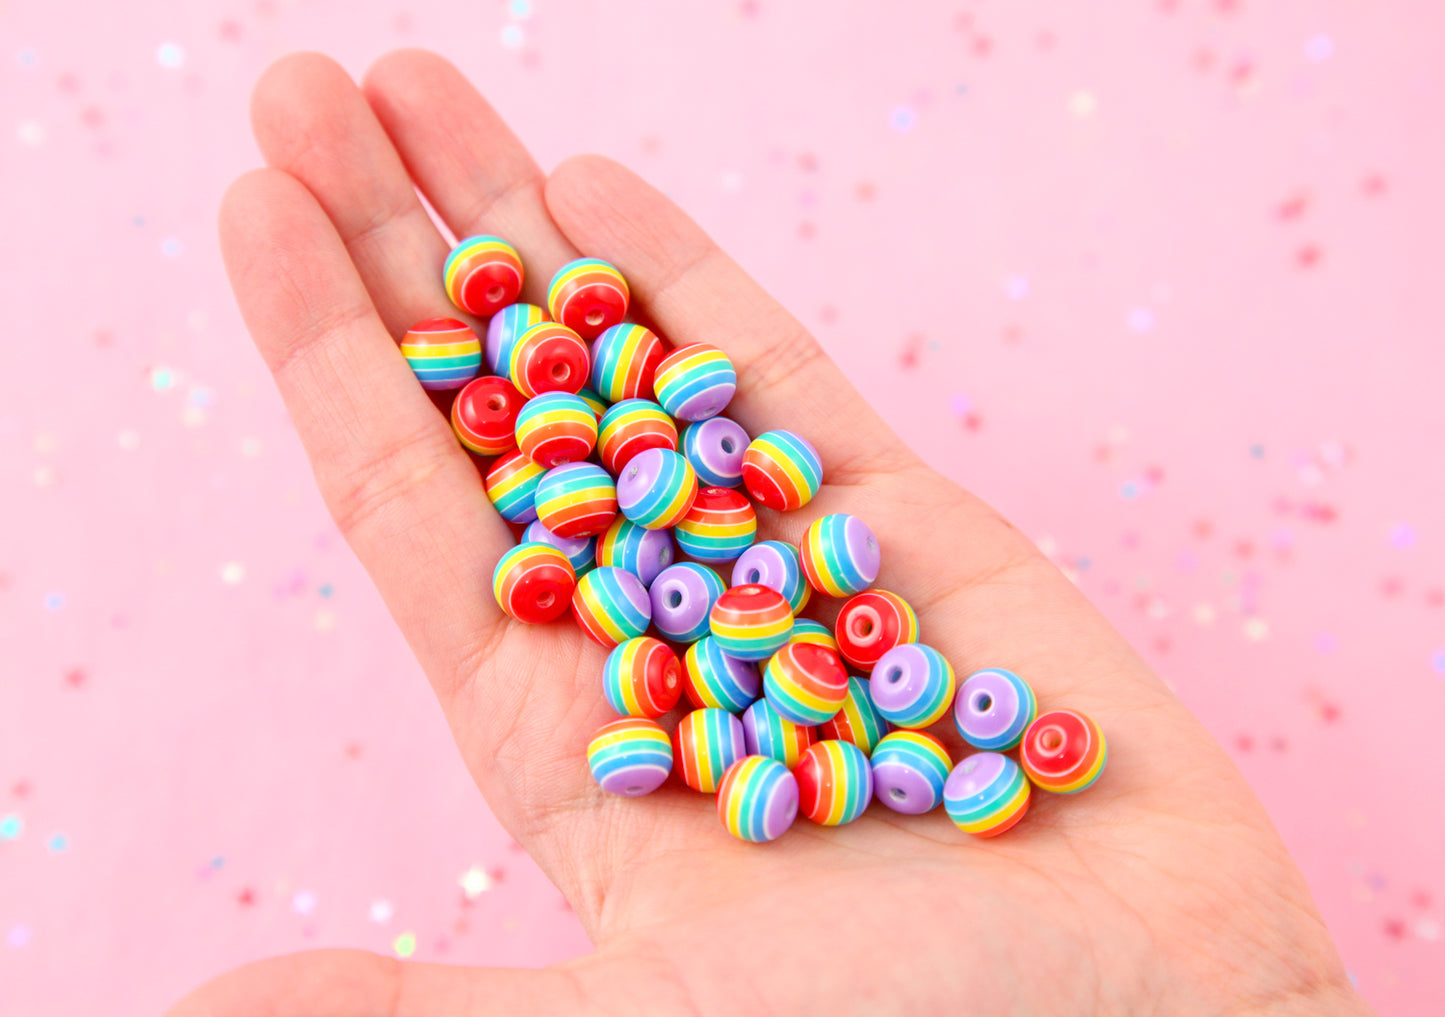 Rainbow Beads - 10mm Opaque Rainbow Striped Resin Beads with Purple, small size beads - 80 pc set